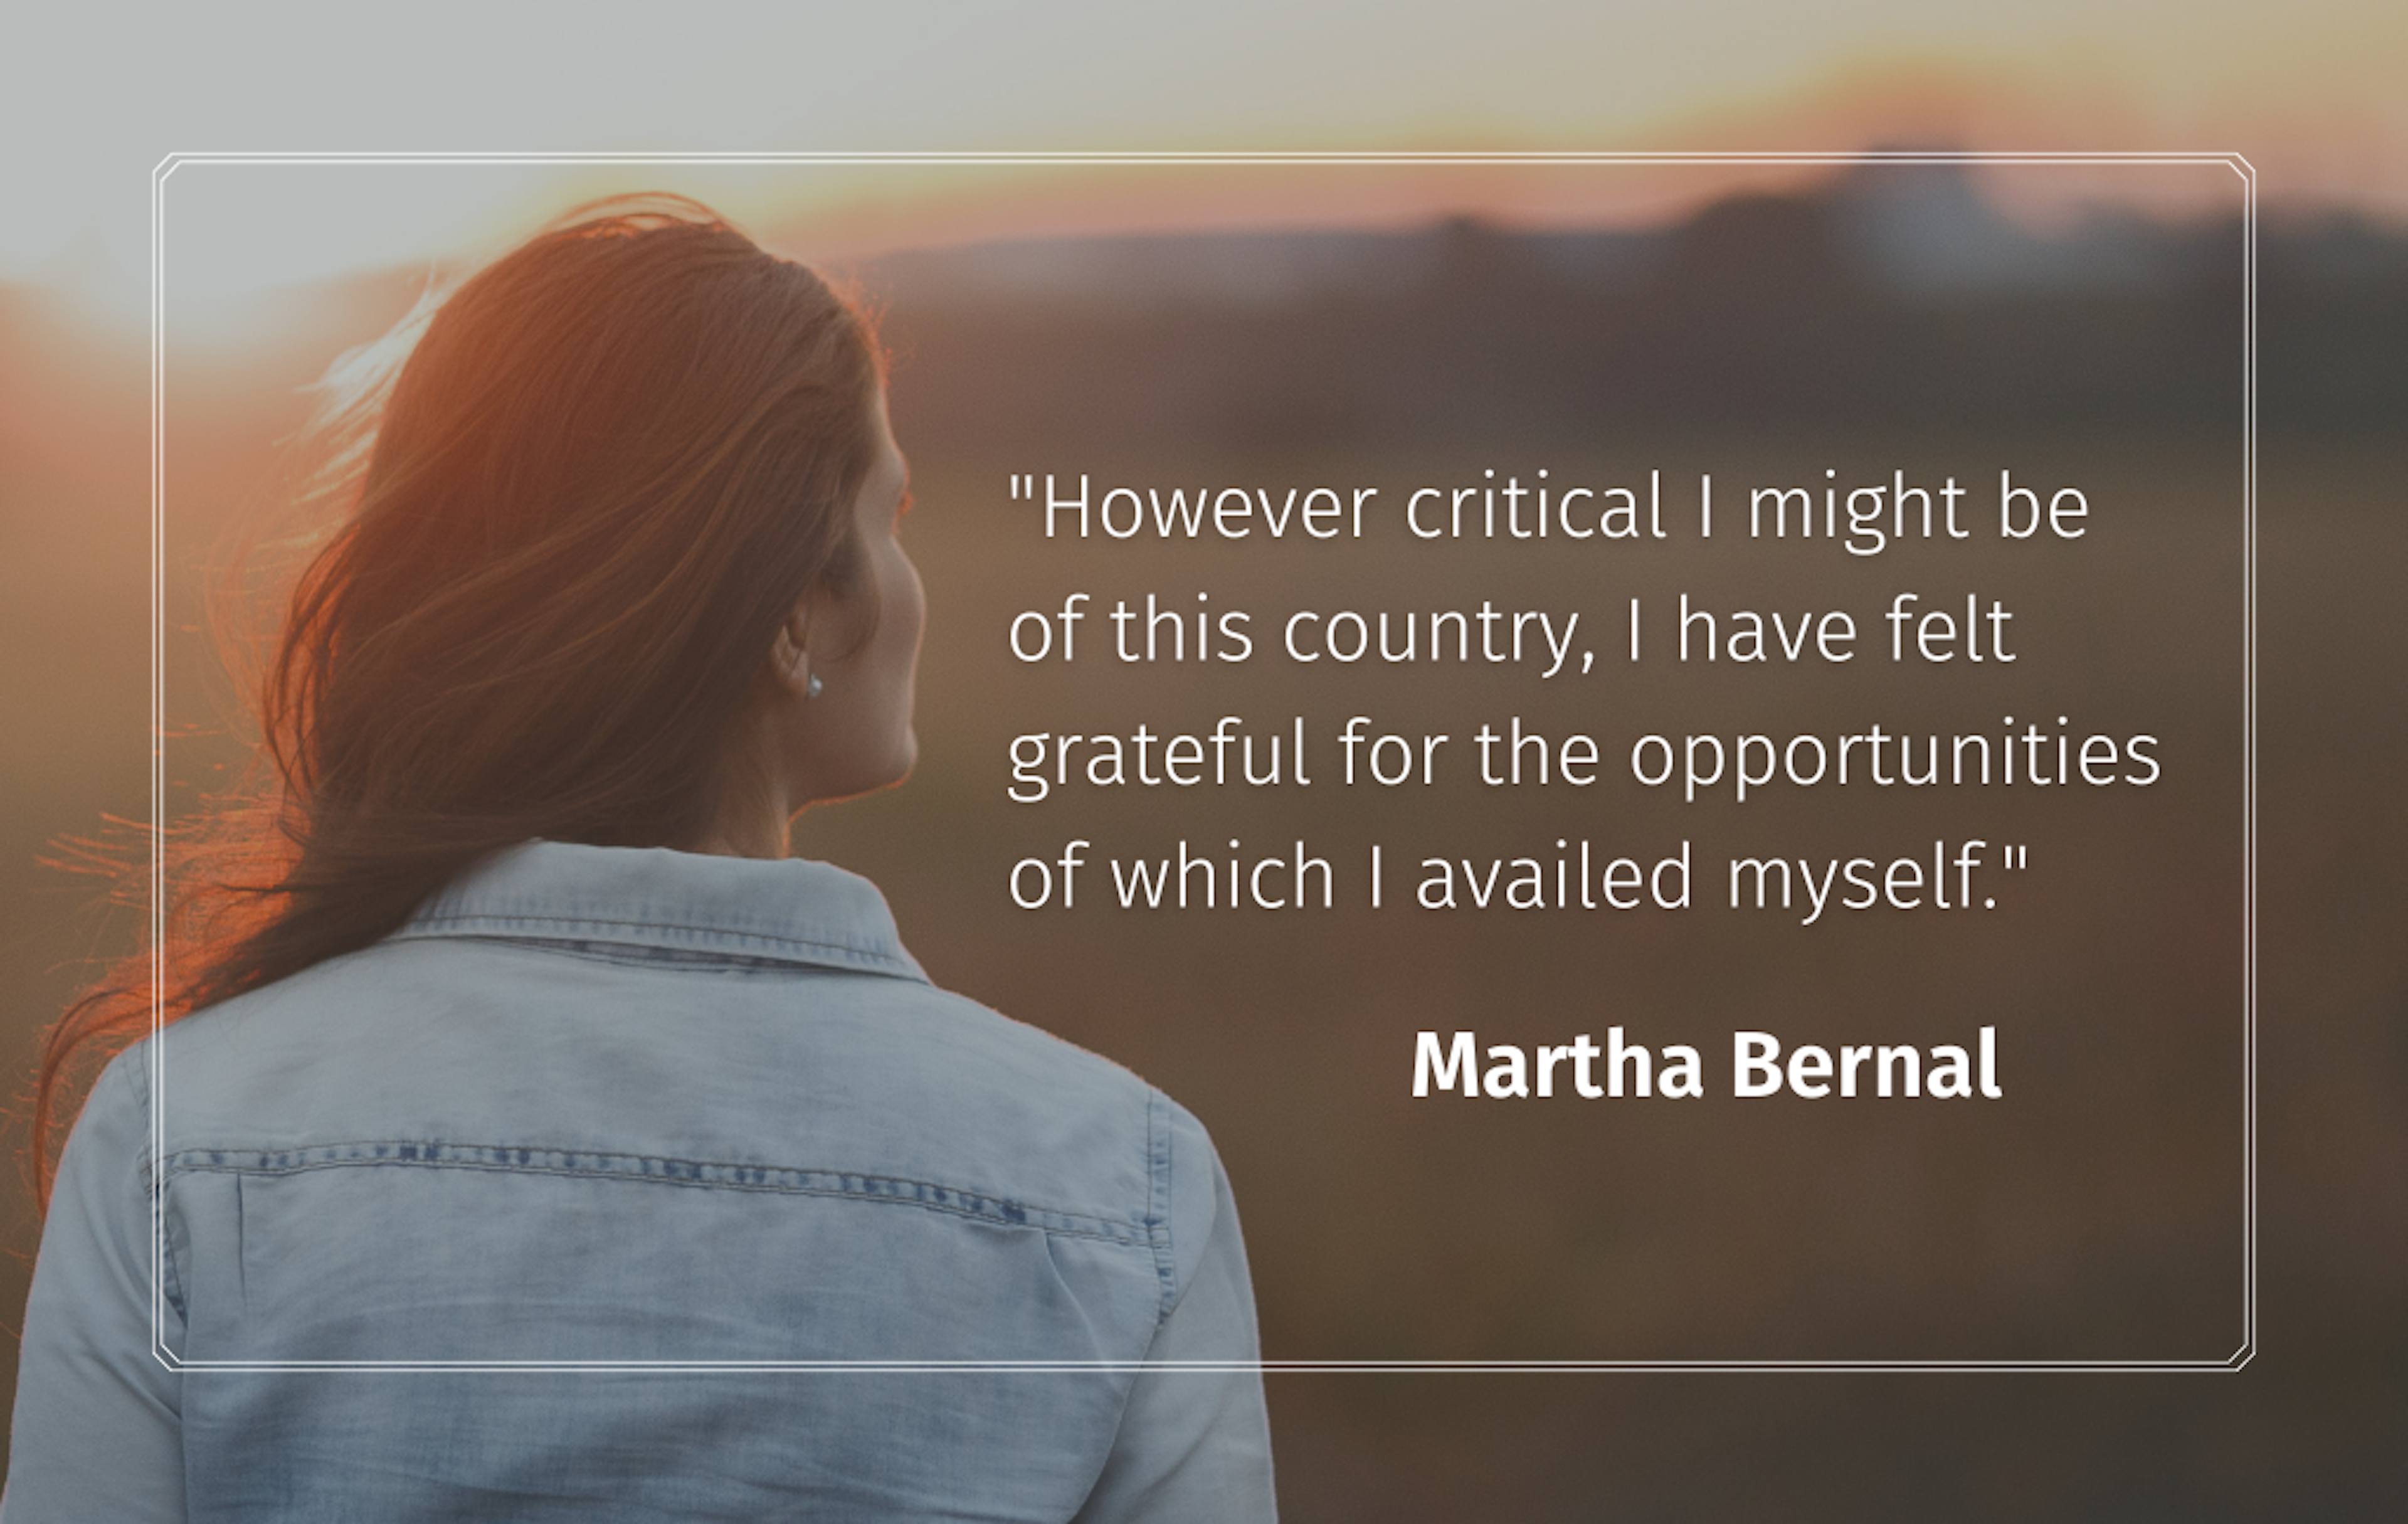 "However critical I might be of this country, I have felt grateful for the opportunities of which I availed myself." Martha Bernal